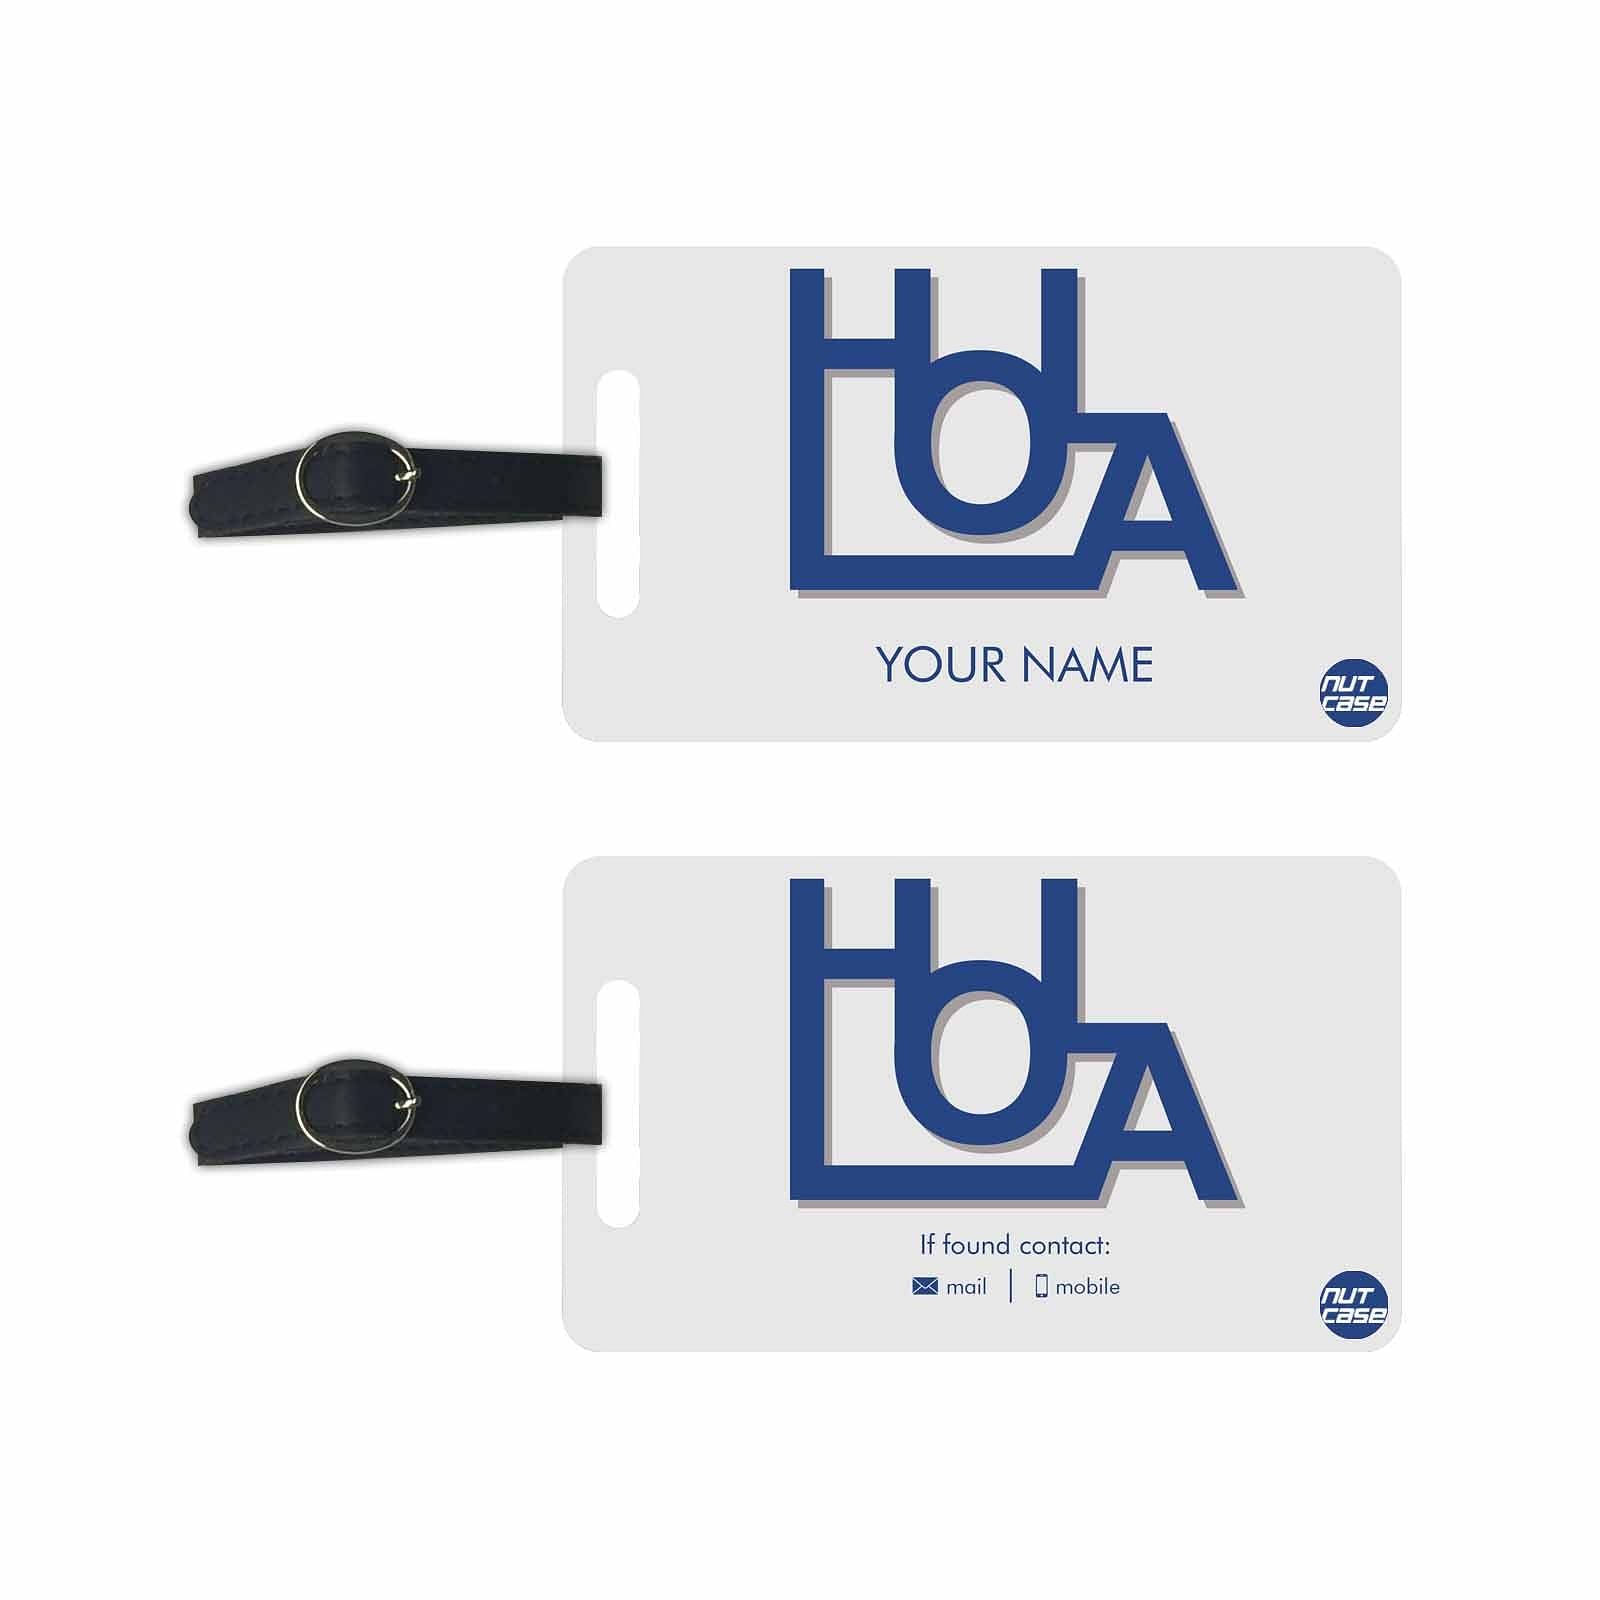 Customized Printed Luggage Tag for Men - Add your Name - Set of 2 Nutcase